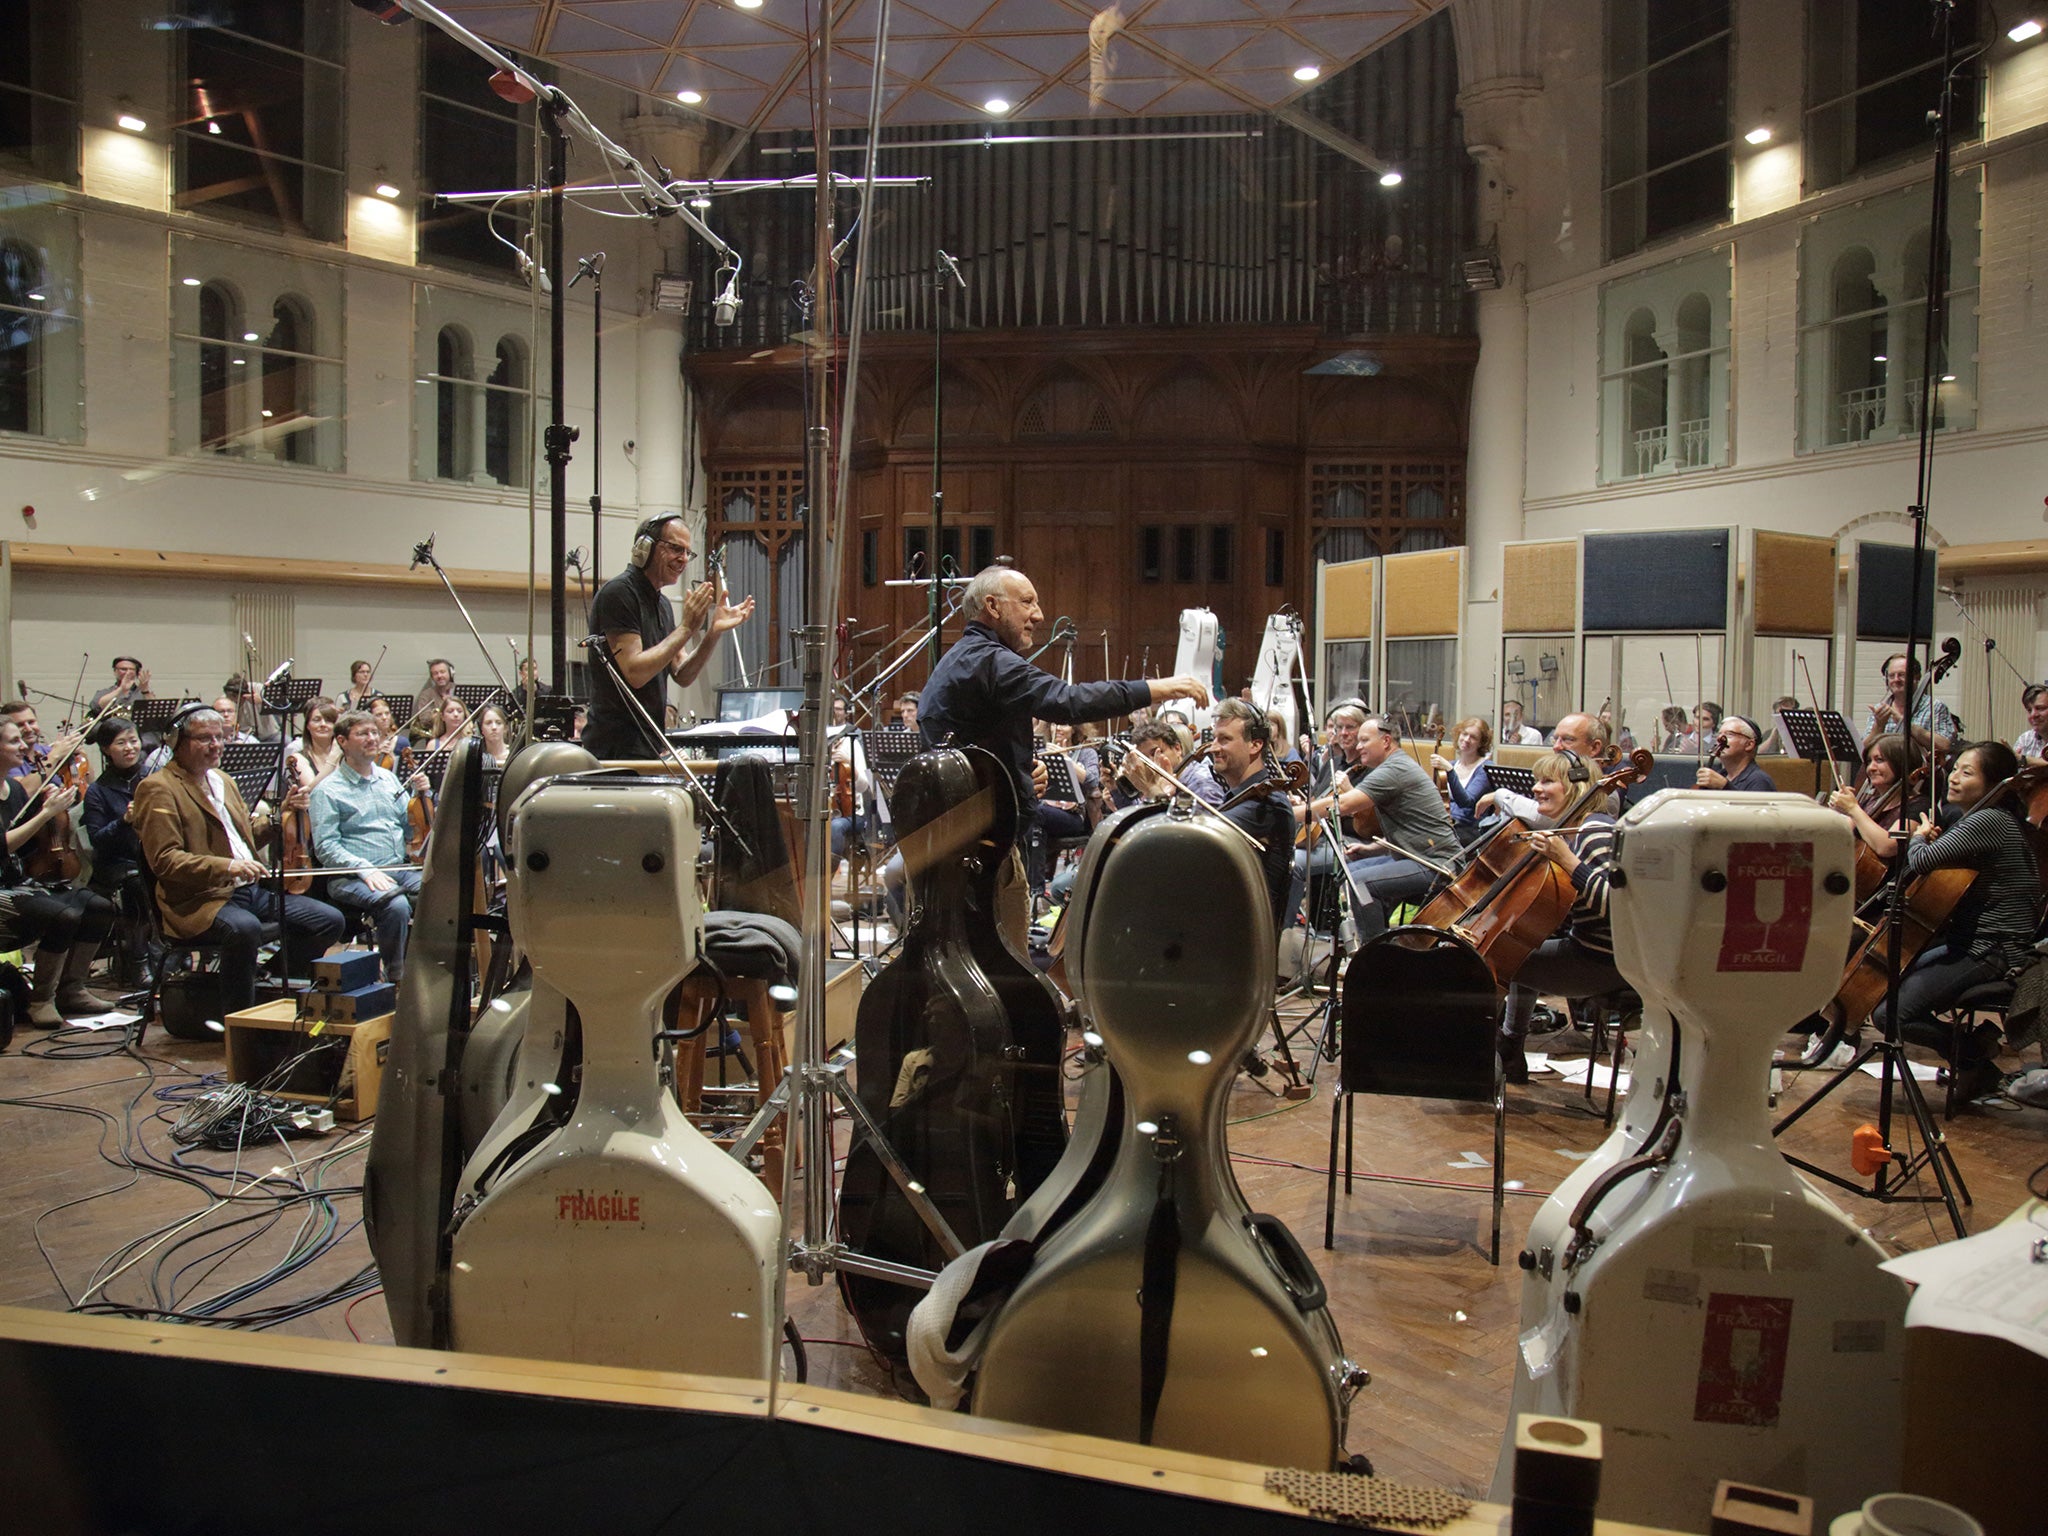 Townshend amid rehearsals for the 'Quadrophenia' classical concert at the Royal Albert Hall